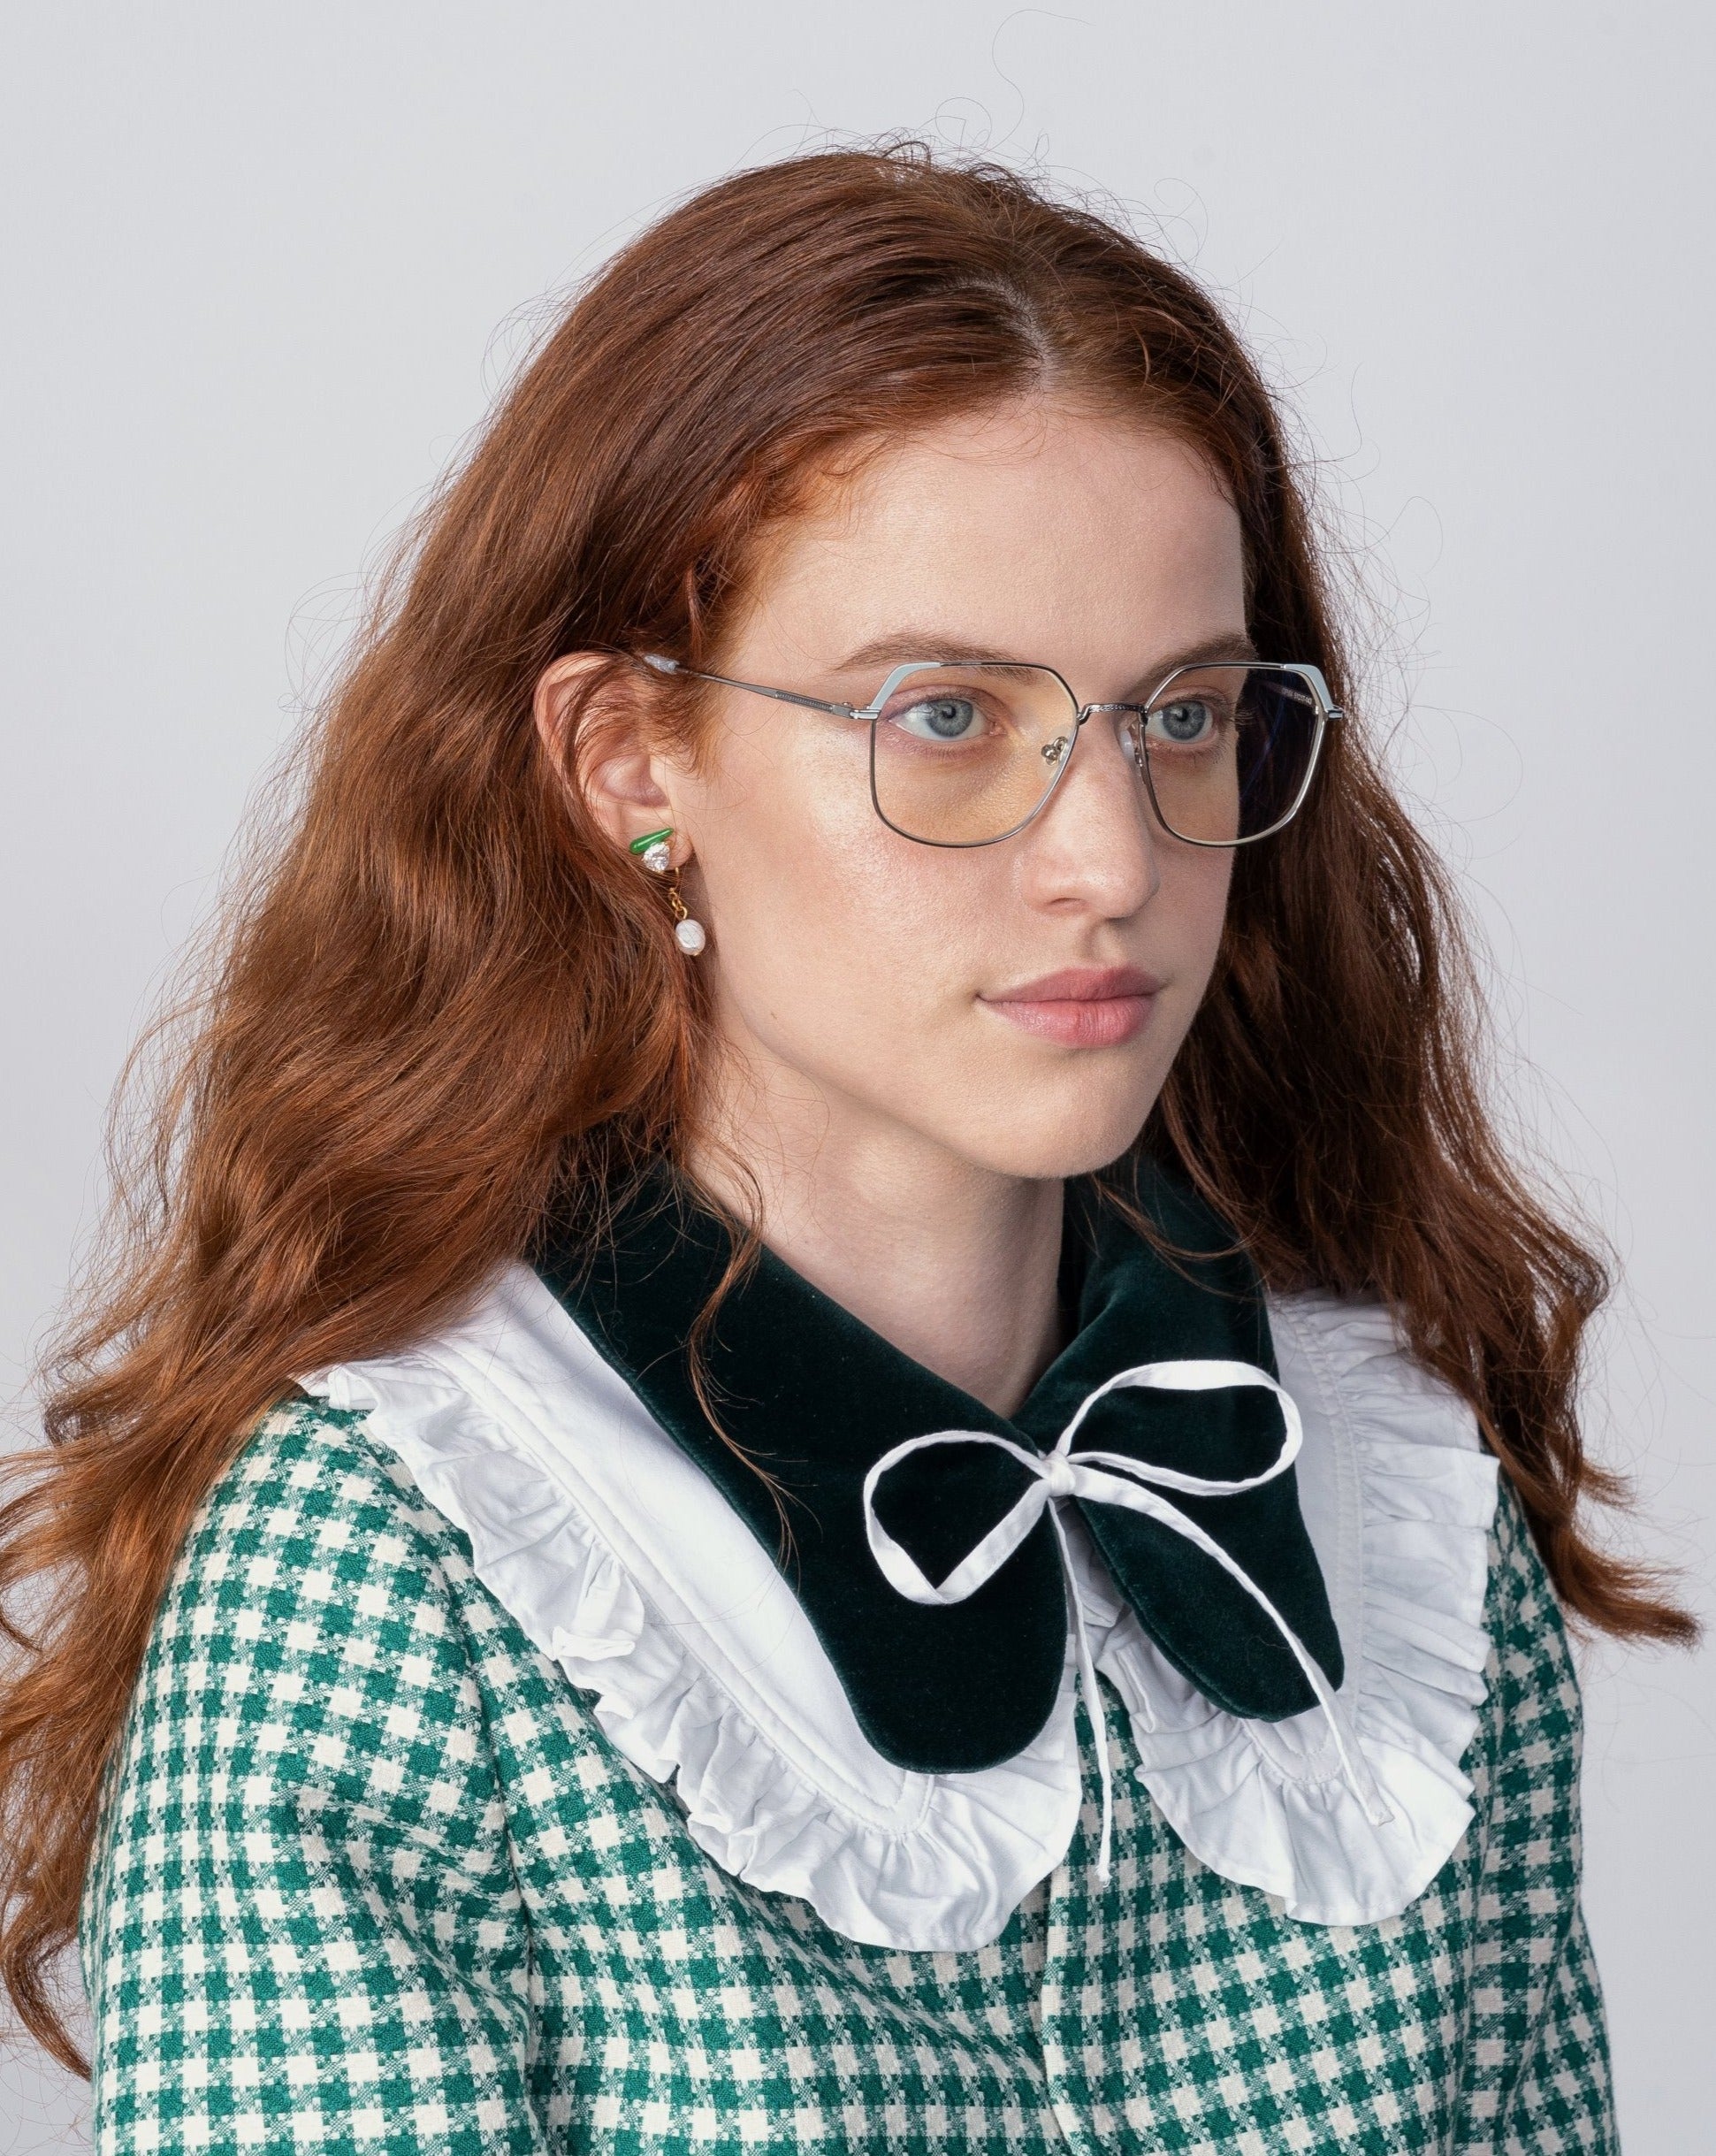 A woman with long, wavy red hair wearing Godiva by For Art&#39;s Sake® eyeglasses with prescription lenses and a blue light filter is seen from the shoulders up. She is dressed in a green and white checkered outfit featuring a dark velvet collar with a white ruffled edge and a bow tied at her neck. The background is plain and light-colored.